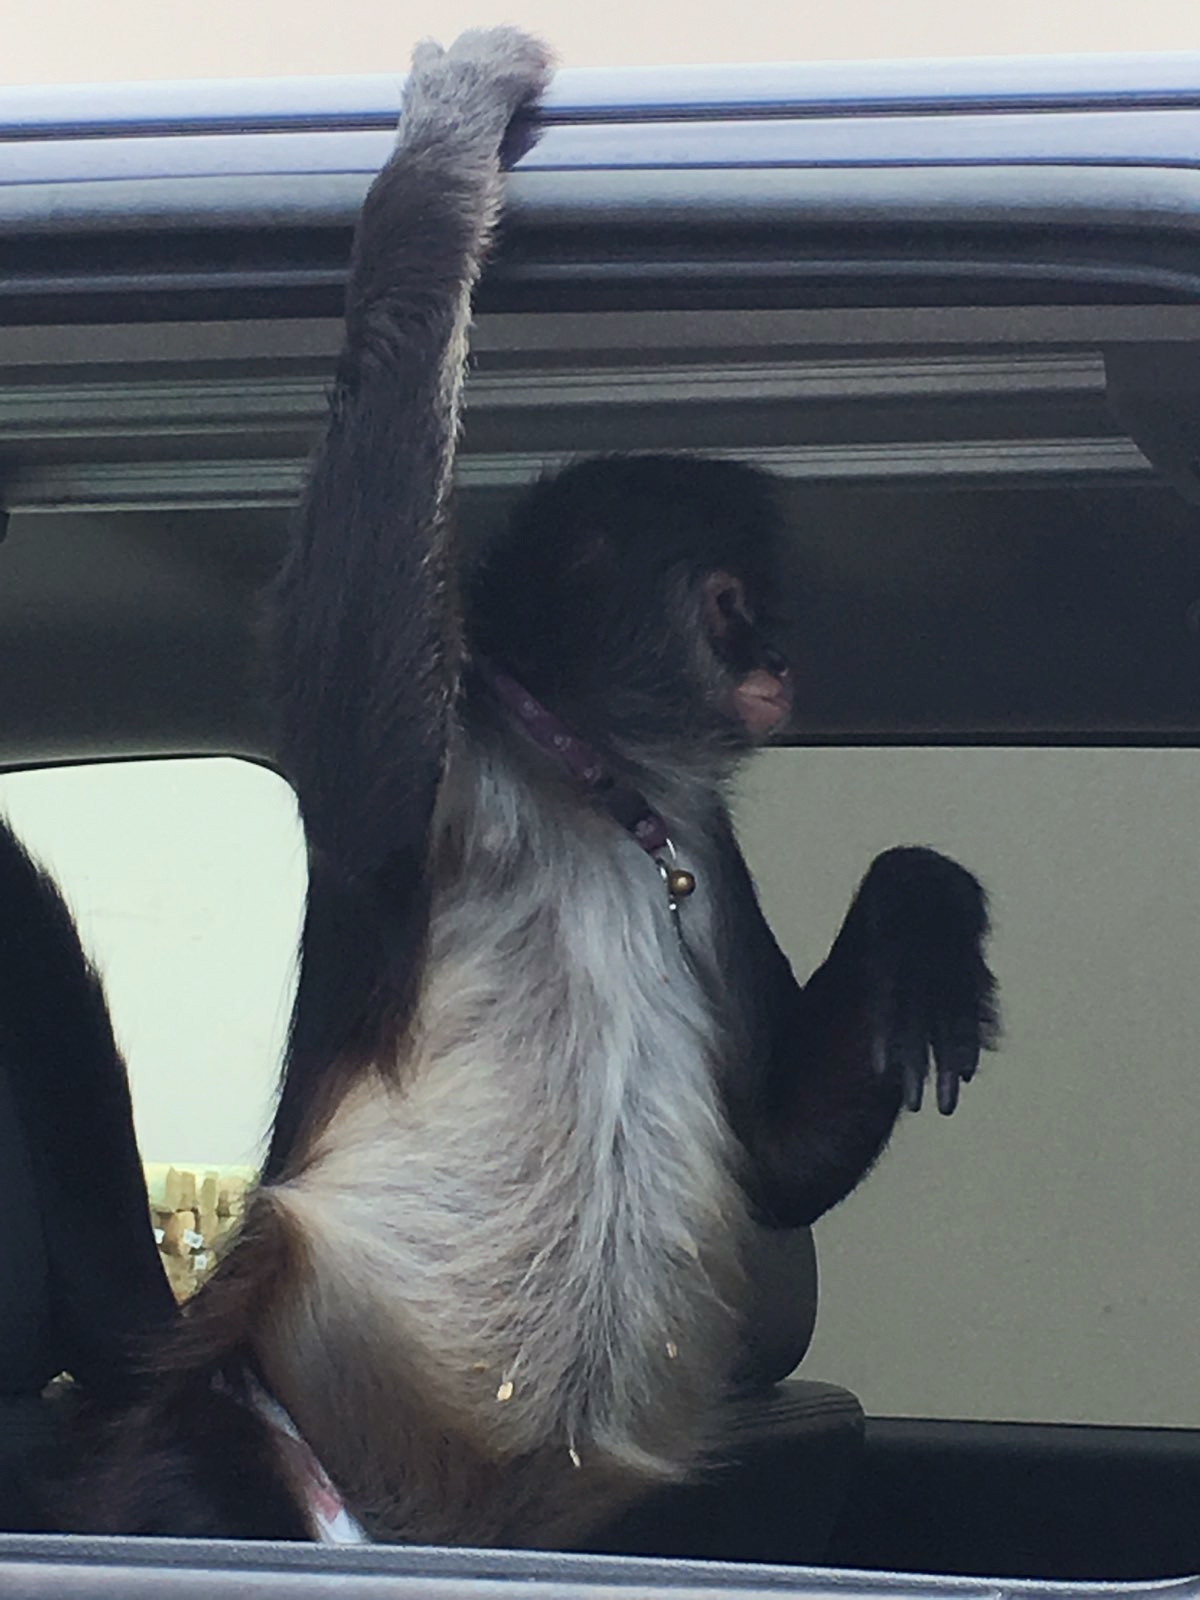 PHOTO: A pet monkey that got loose, bit a woman who tried to help reunite it with its owner in Okeechobee, Fla., June 4, 2018.